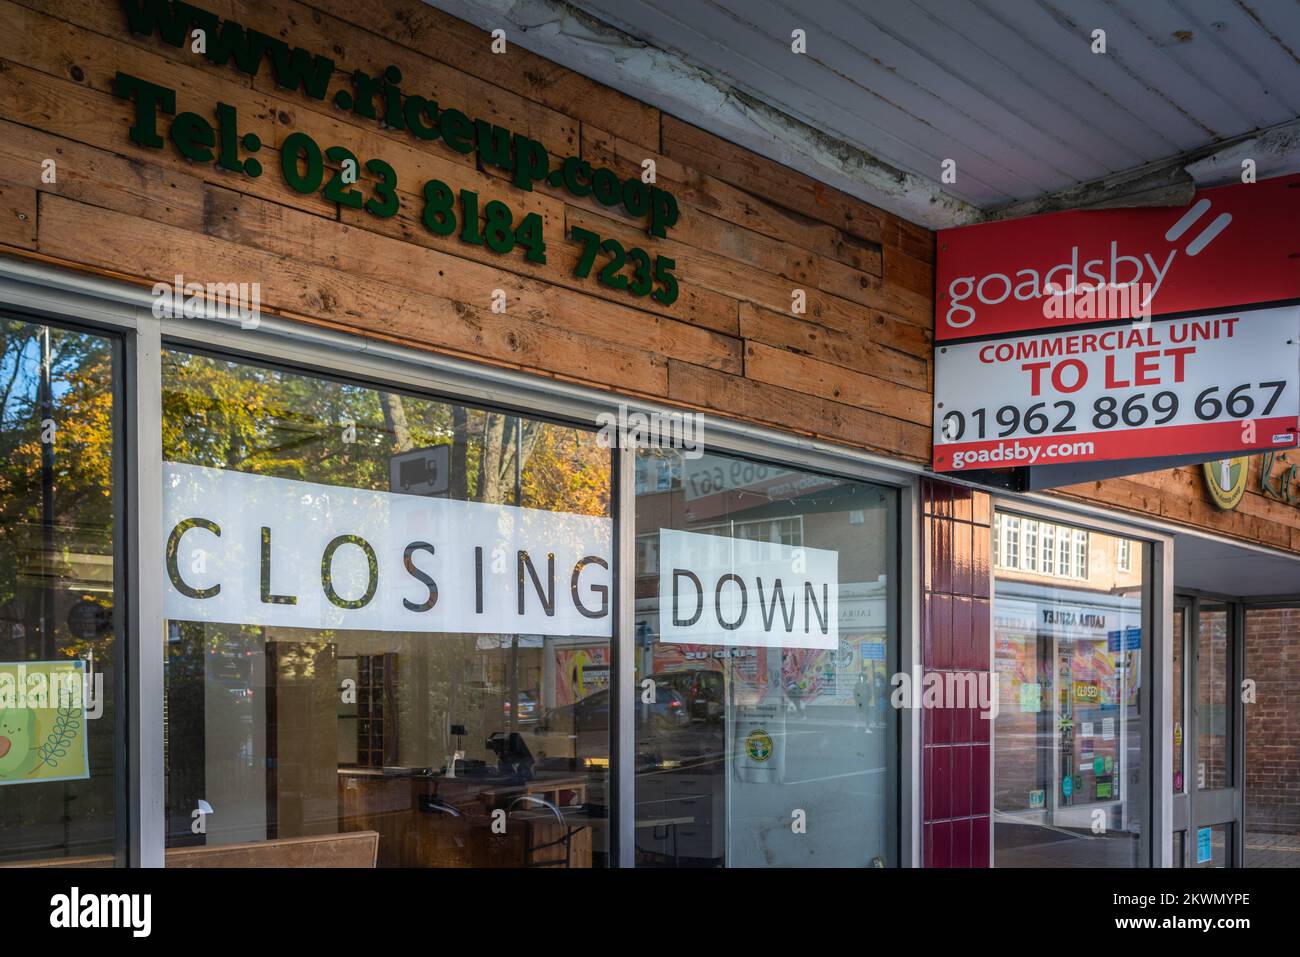 Closing Down sign in a shop window and a to let sign, England, UK Stock Photo